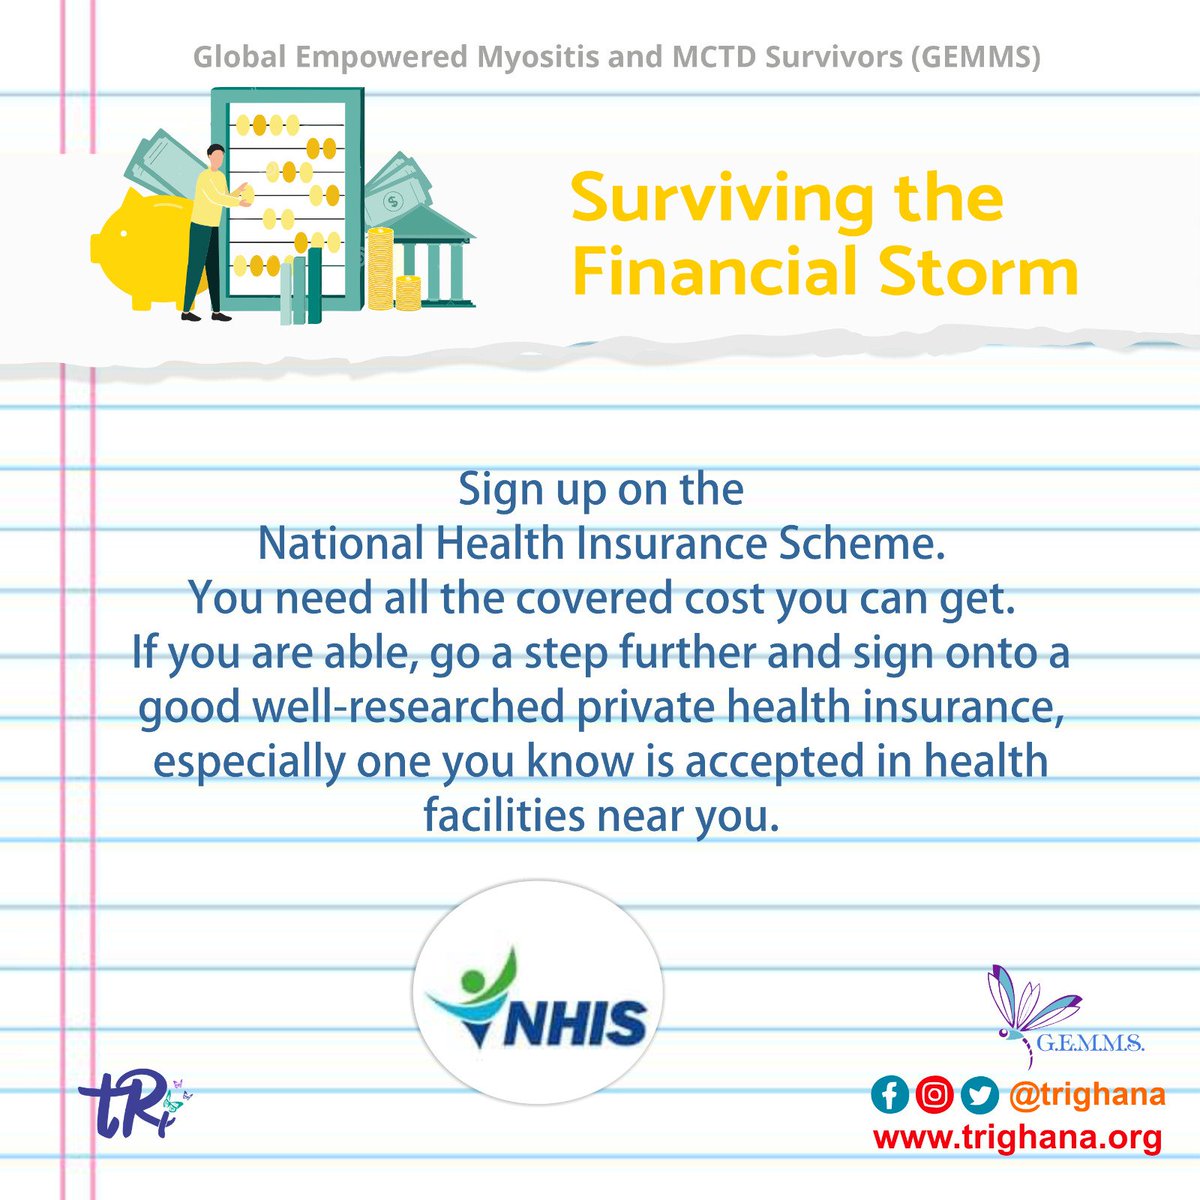 Sign up on the 
National Health Insurance Scheme. 
You need all the covered cost you can get. 
If you are able...
#GEMMS #autoimmune #selfpreservation #tRi #autoimmunediseaseawareness #selfcare #Survivingfinance   #finance